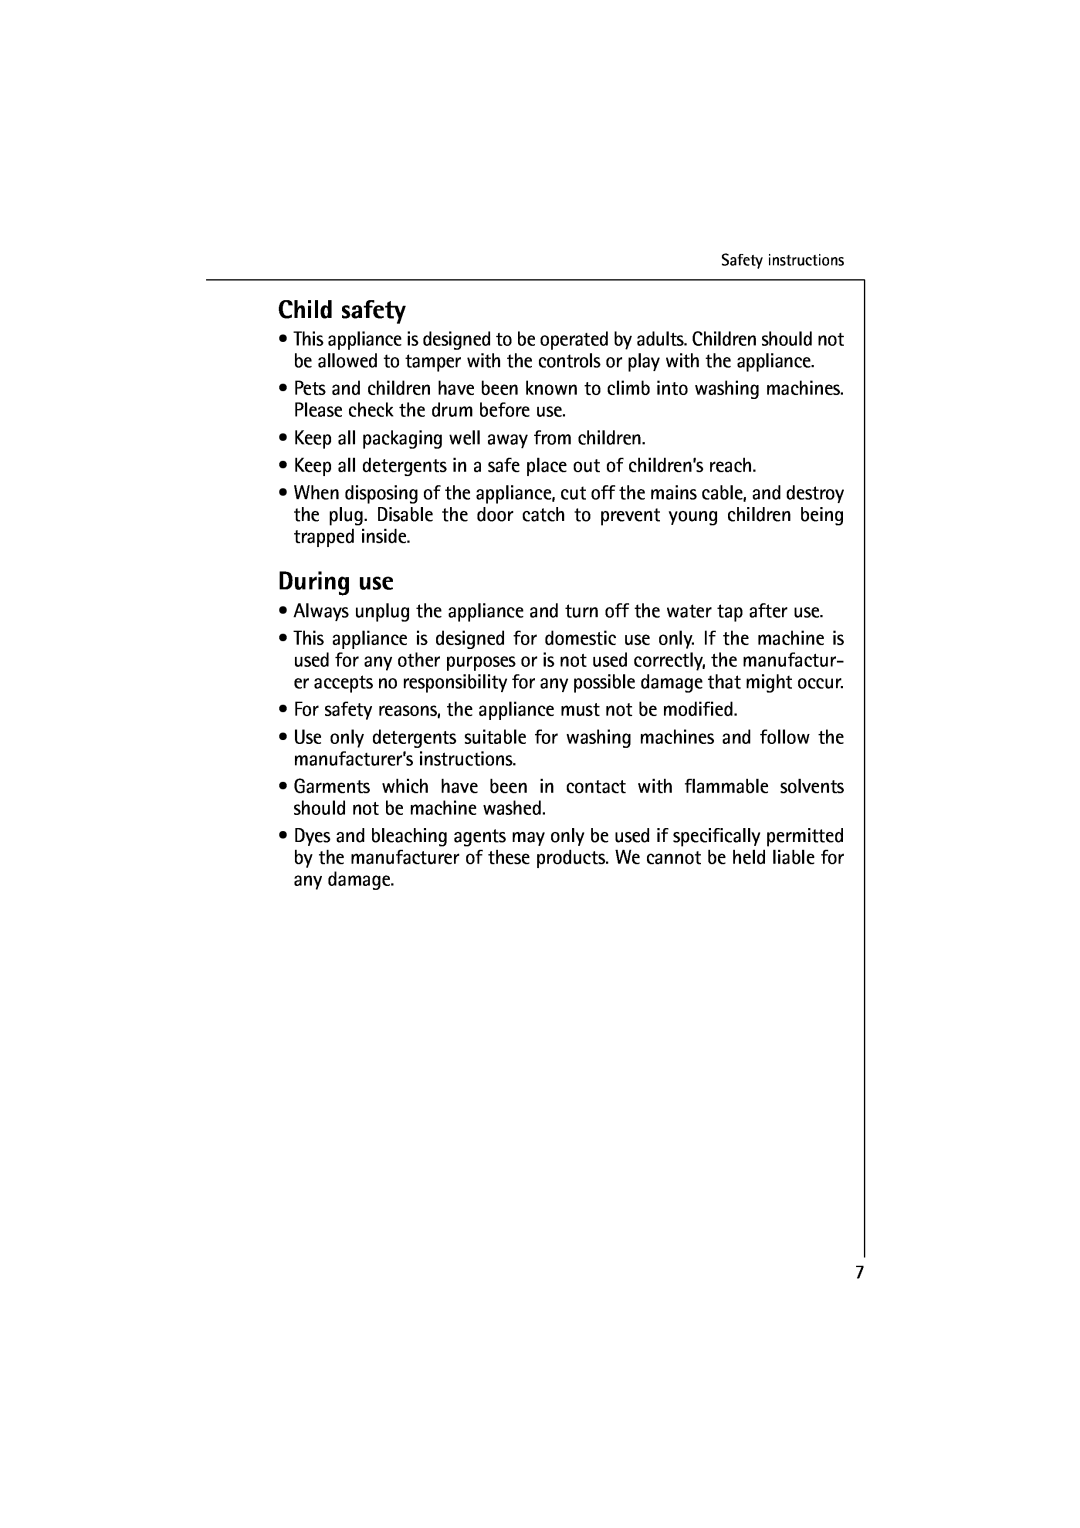 Electrolux 10500 VI manual Child safety, During use 